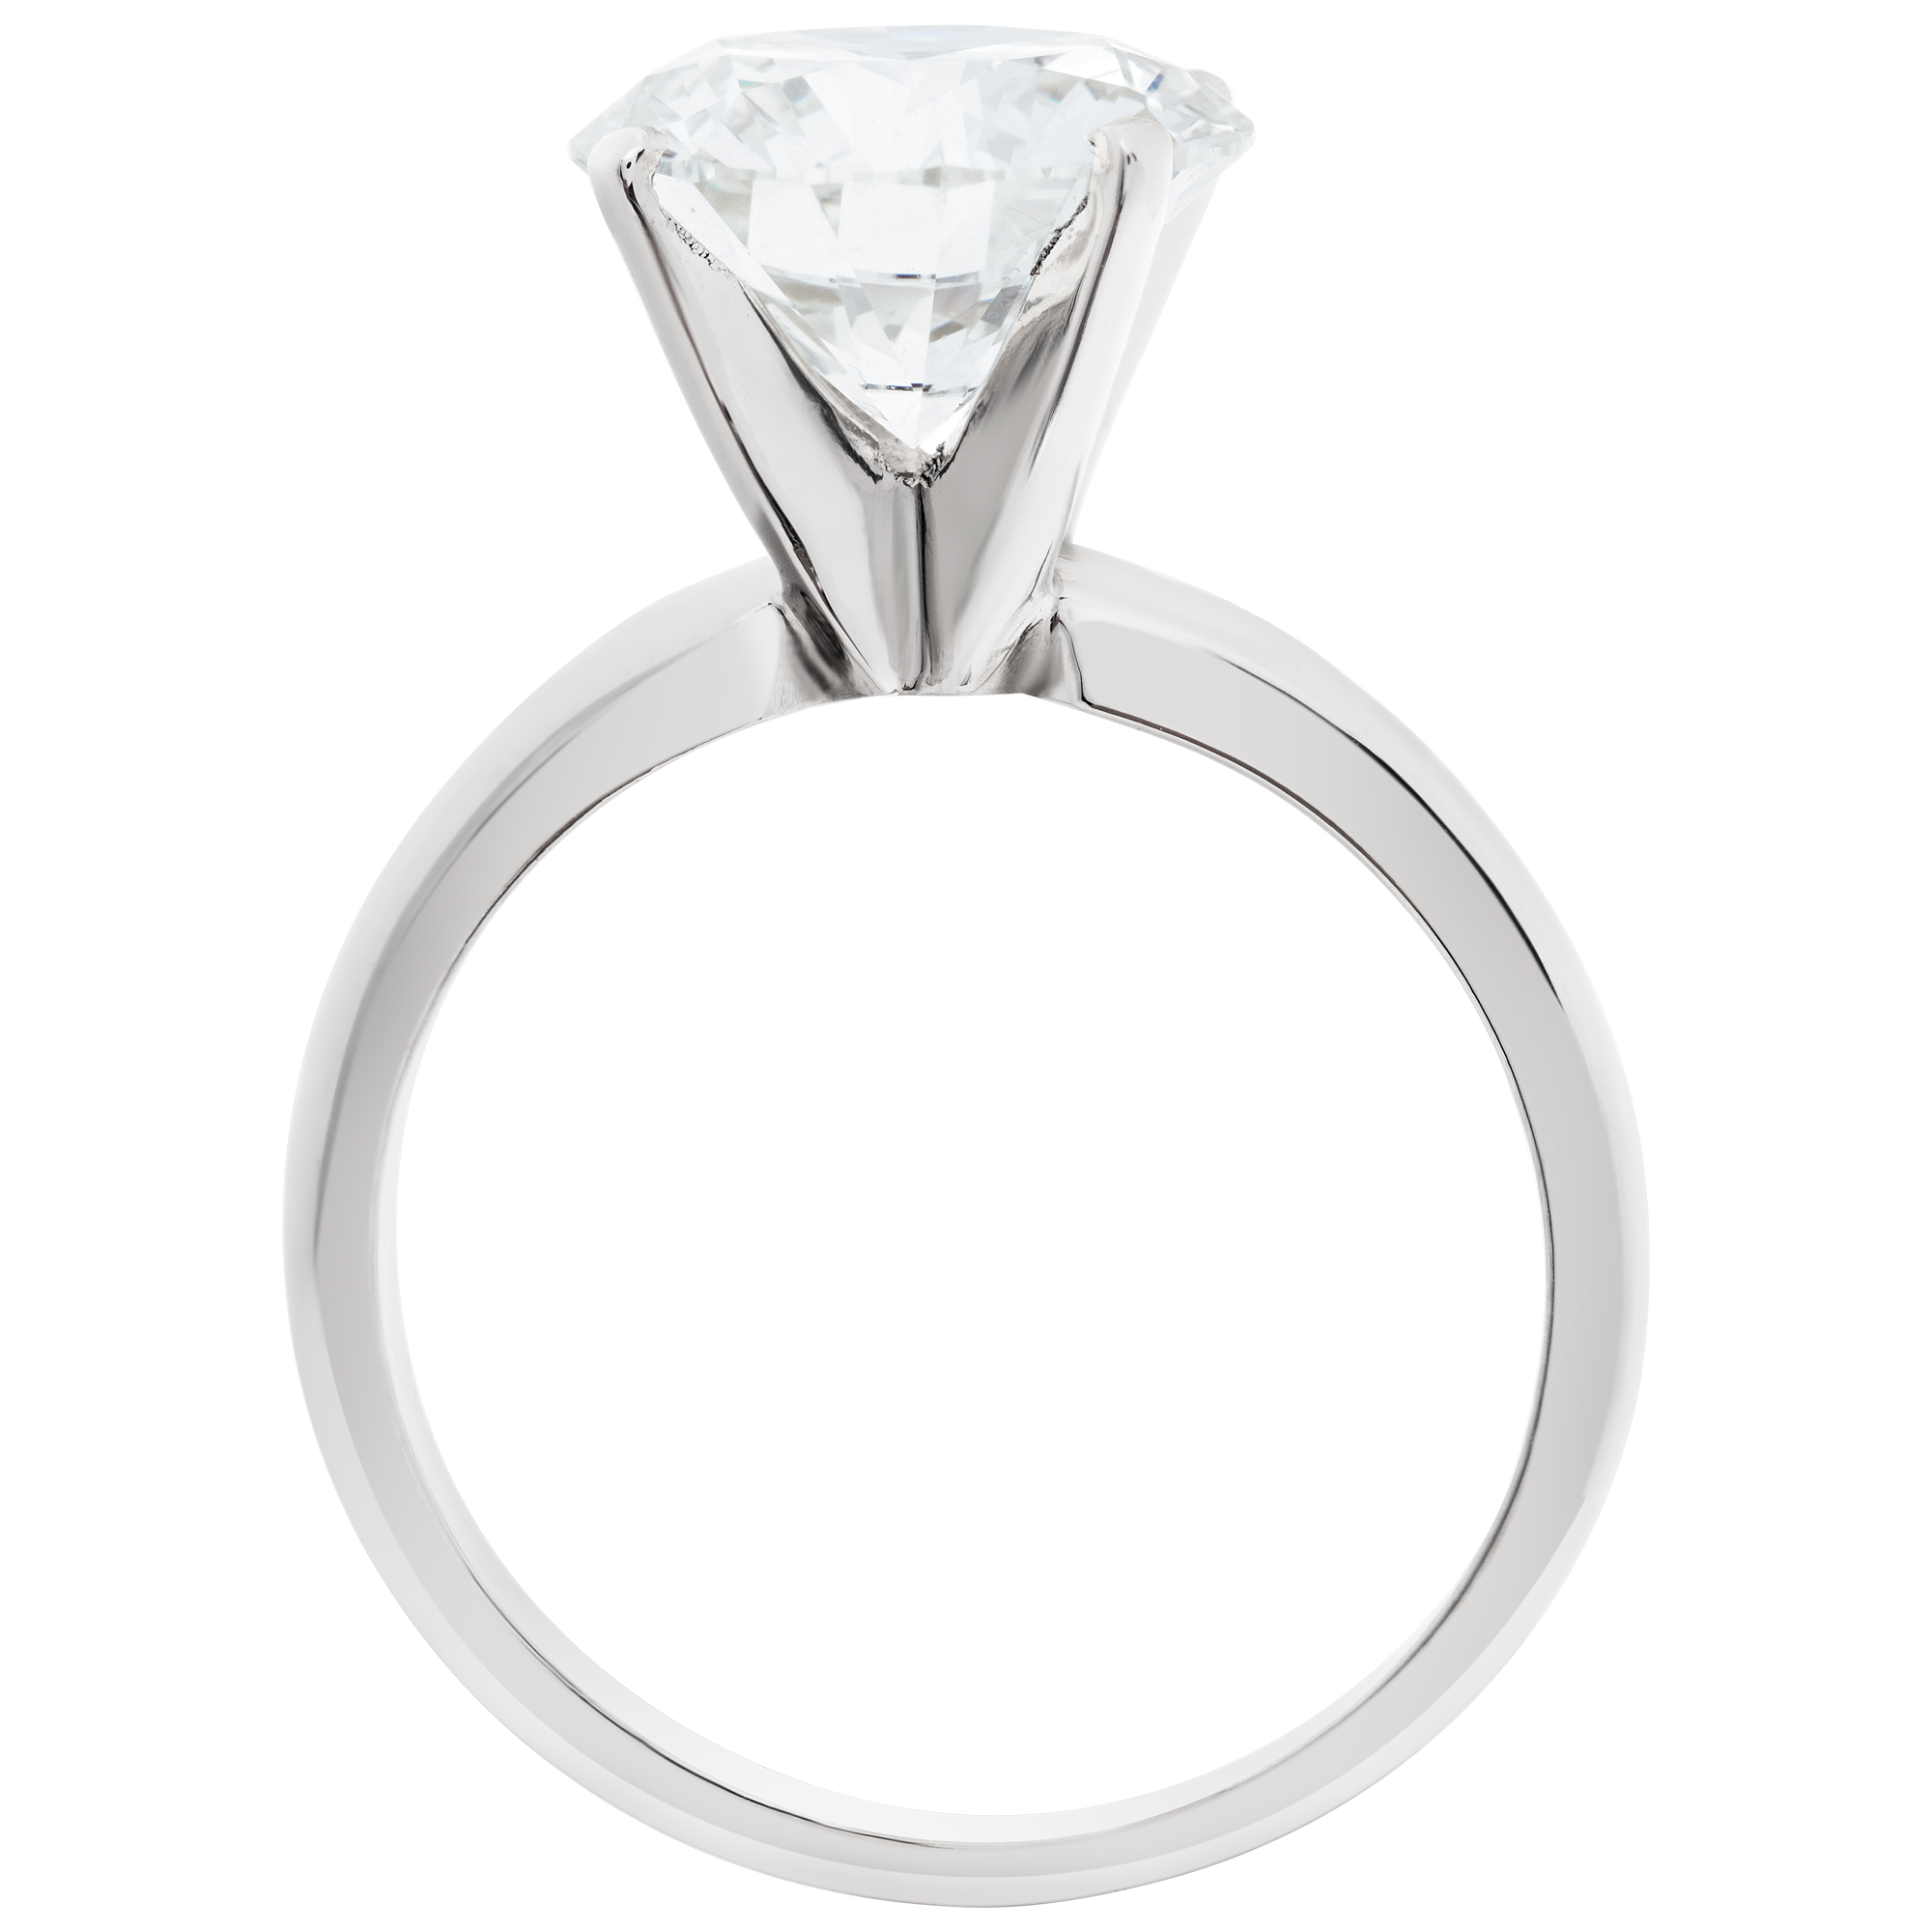 GIA certified round brilliant cut diamond 3.02 carat (L color, Internally Flawless clarity) solitair (Stones)